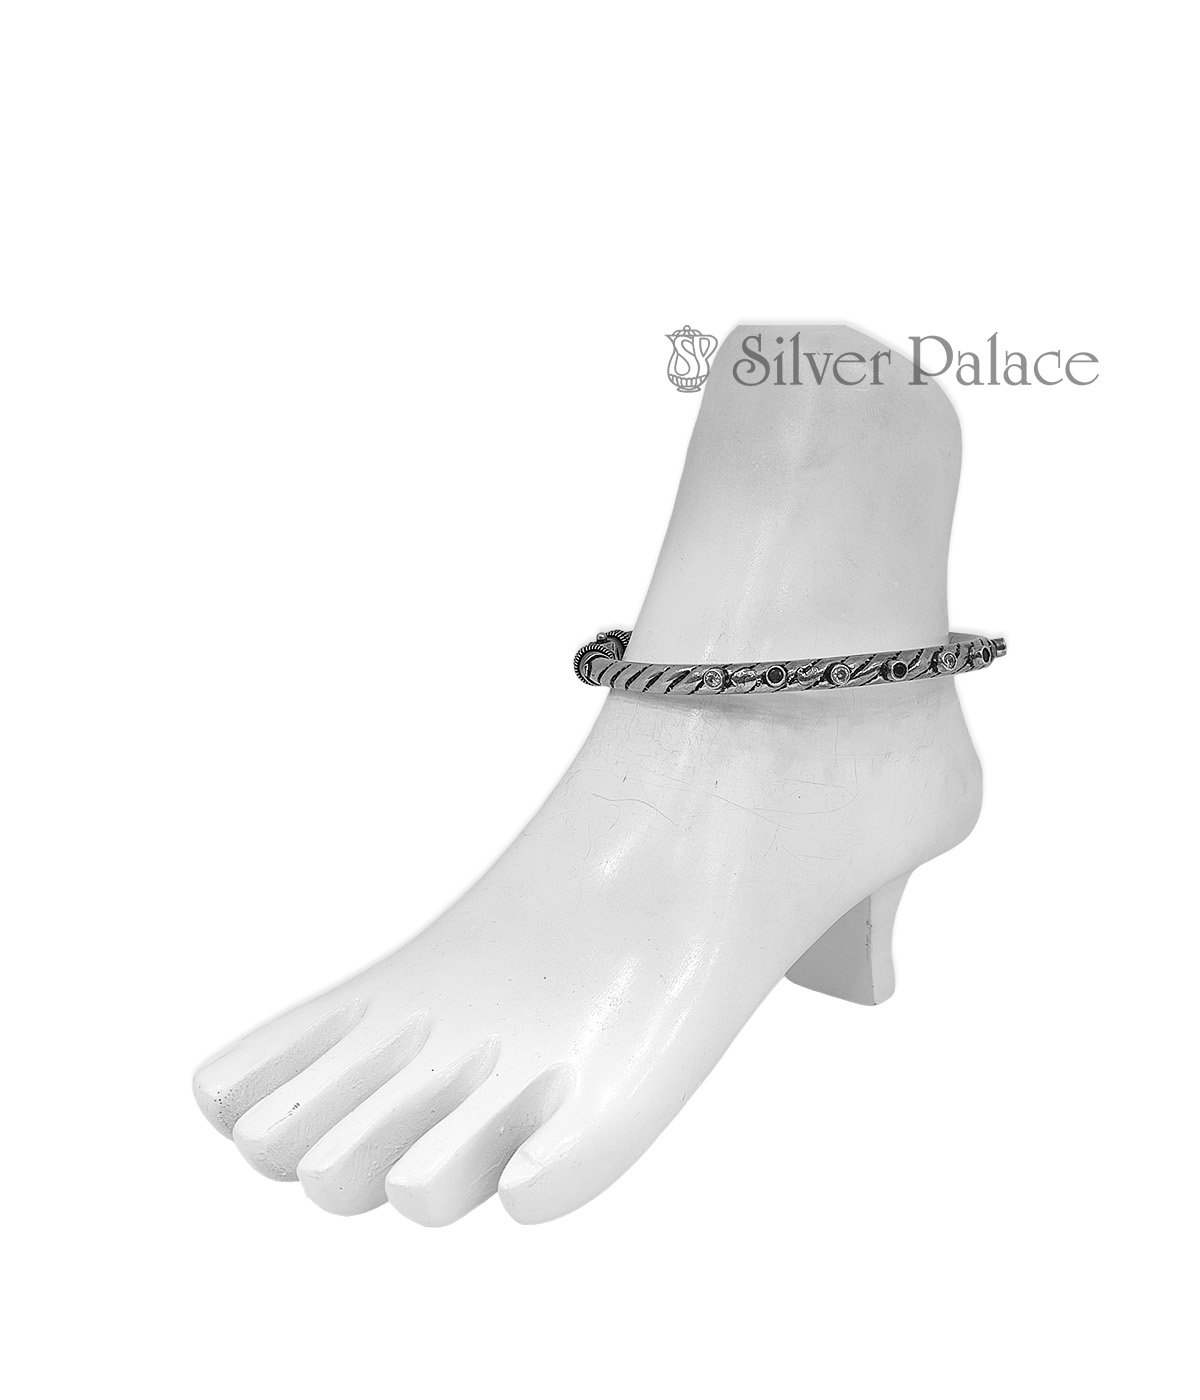 92.5 OXIDISED SILVER BANGLE TYPE ANKLETS